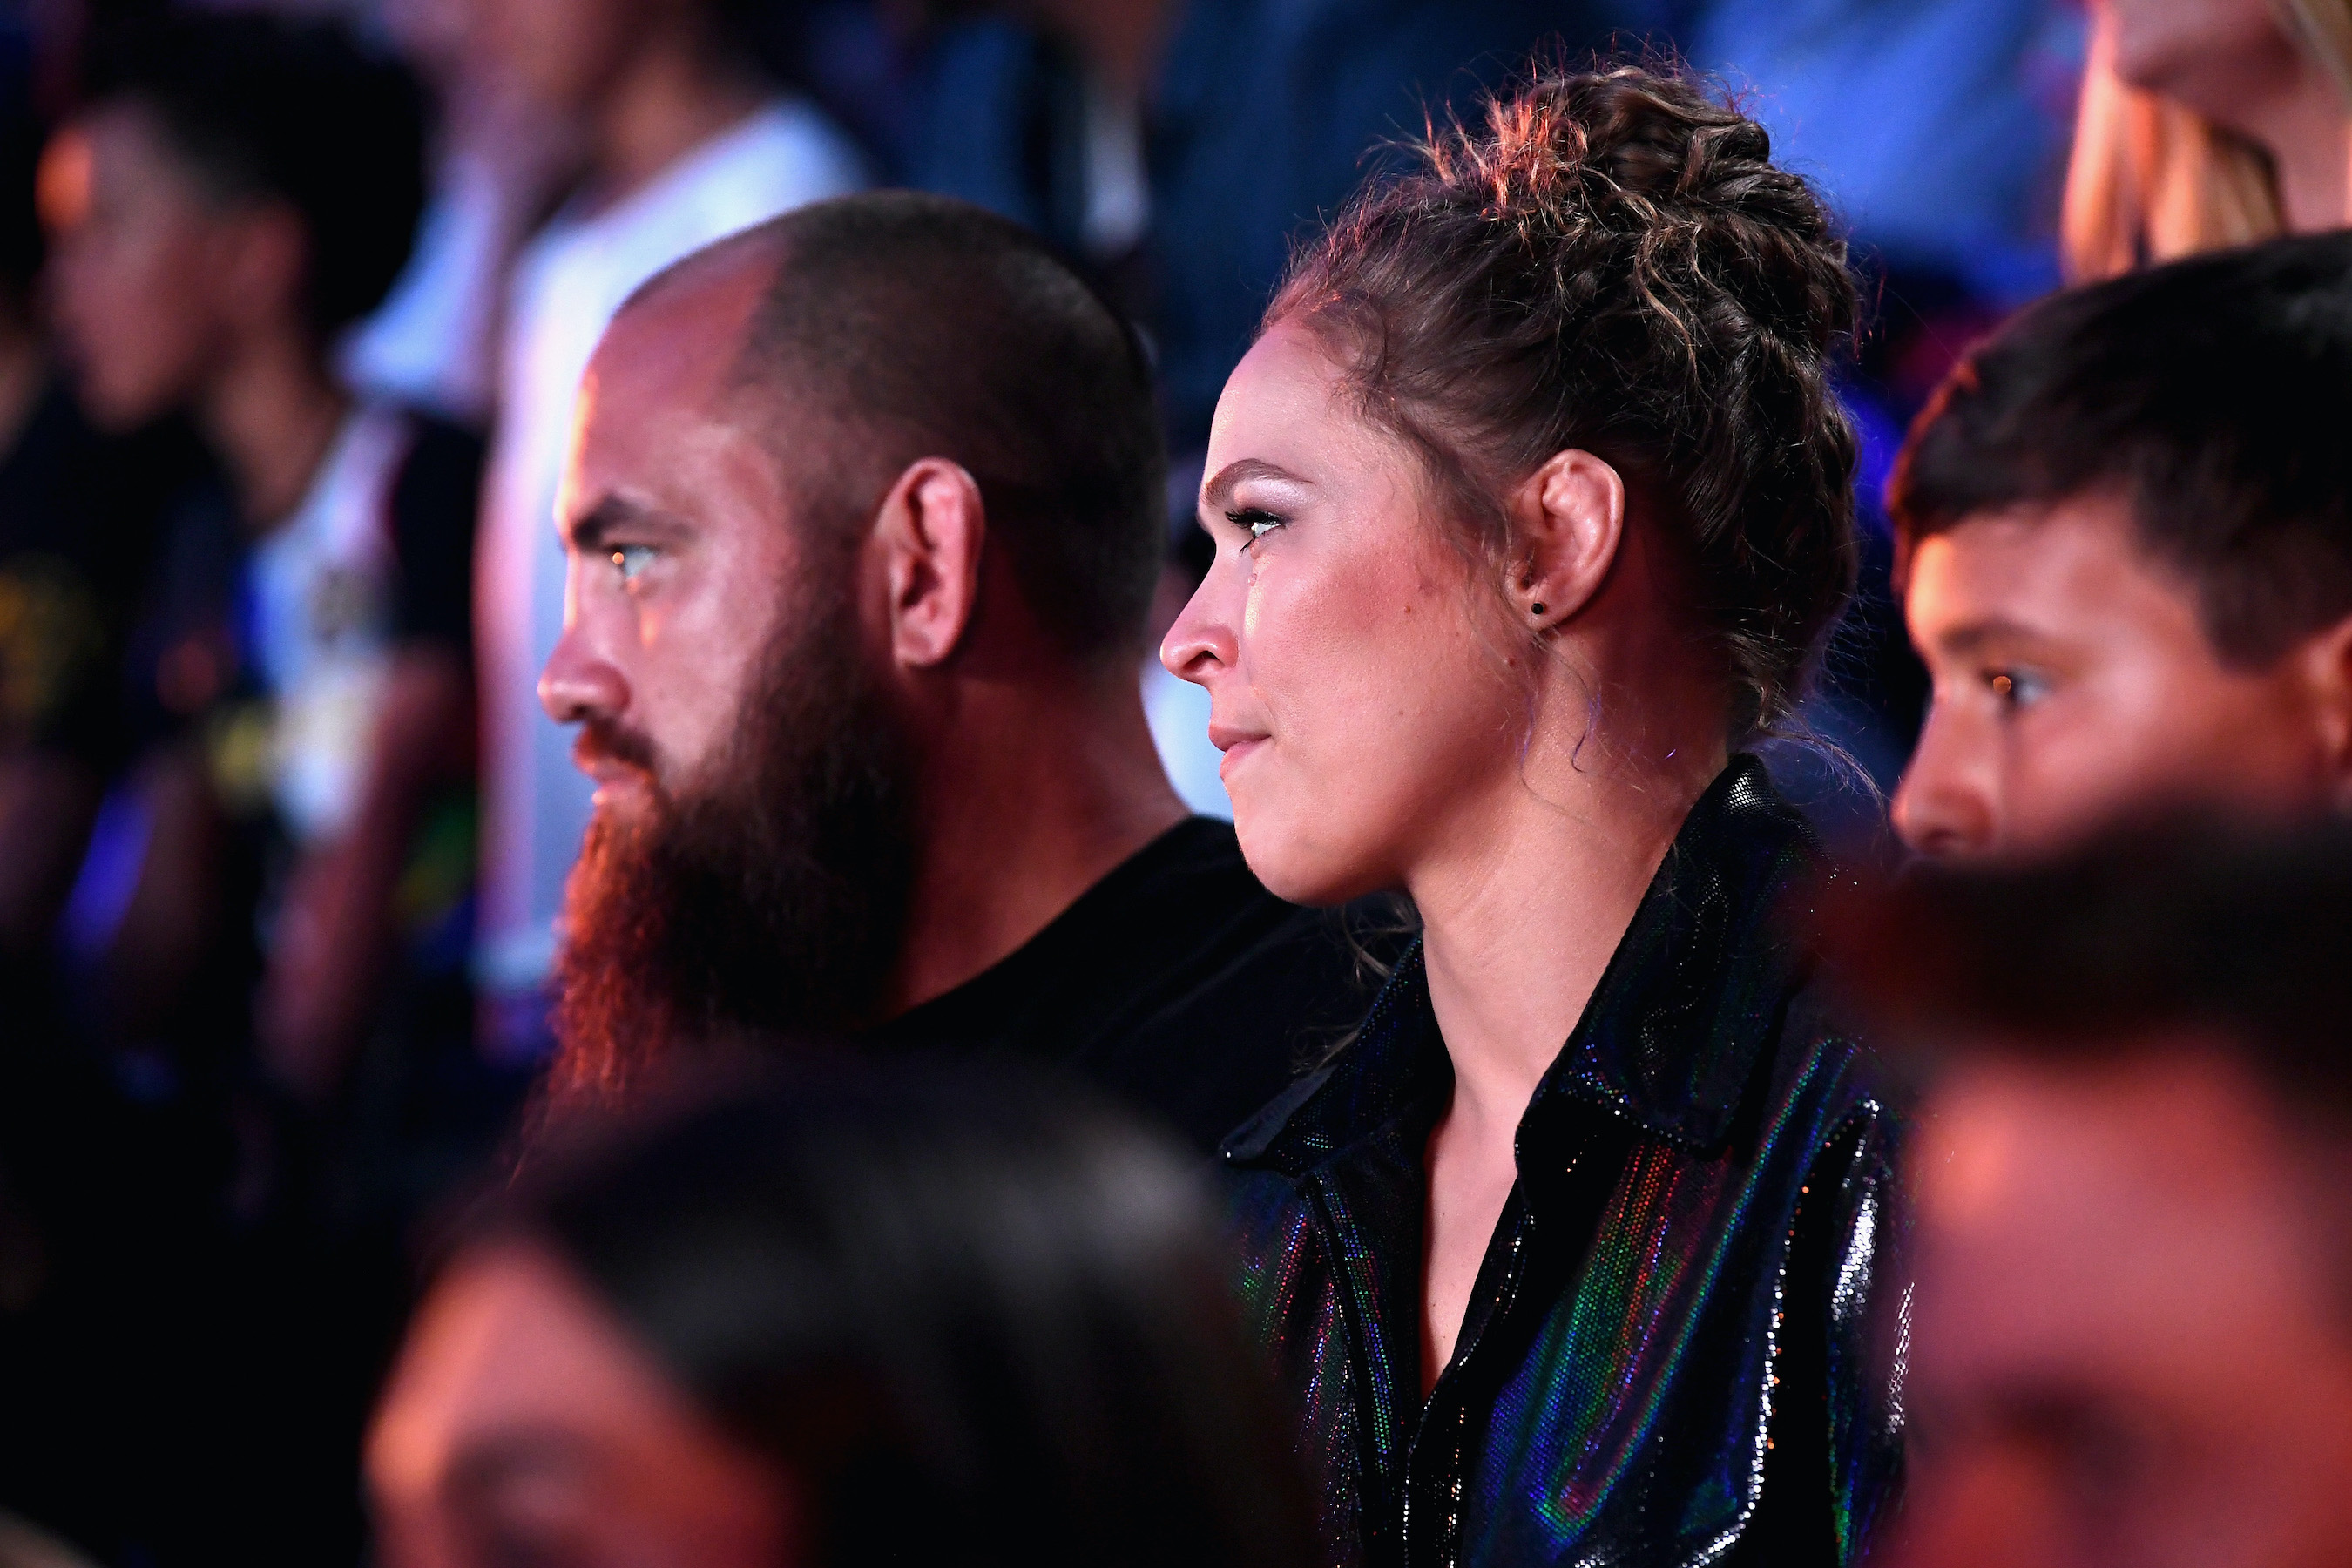 Ronda Rousey Is Still the Highest-Paid Female WWE Wrestler By Far